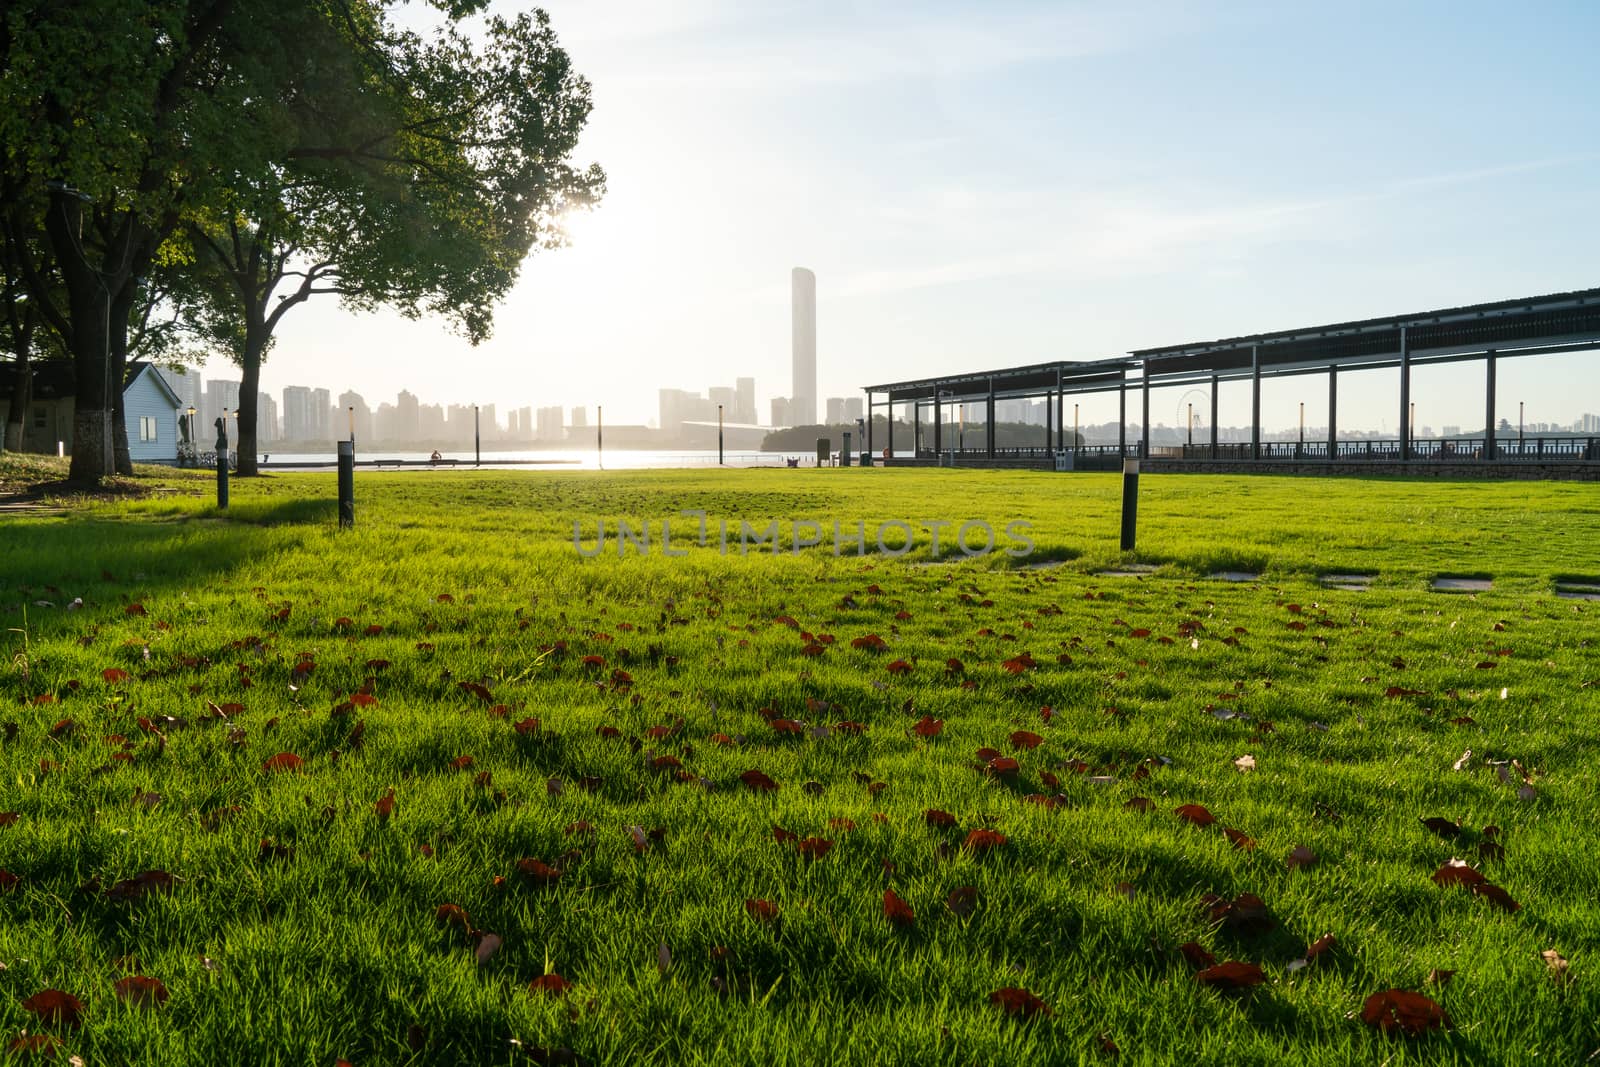 The sun on the grass in a morning of the city. Photo in Suzhou, China.